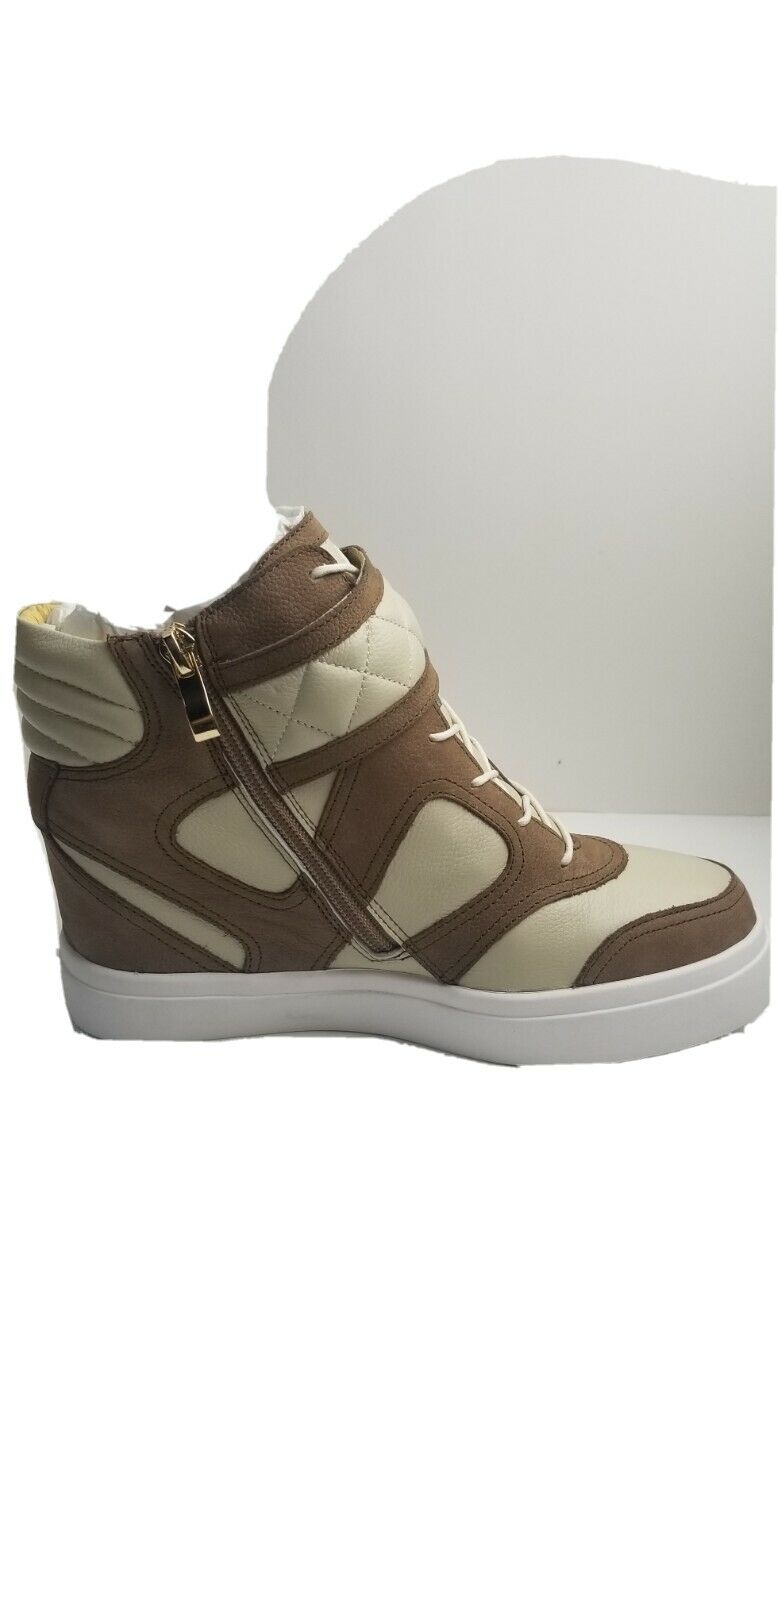 Mario ROSSINI Brown/Beige High Tops with lifts, women's Sz 7, Zipper/Laces. NWB